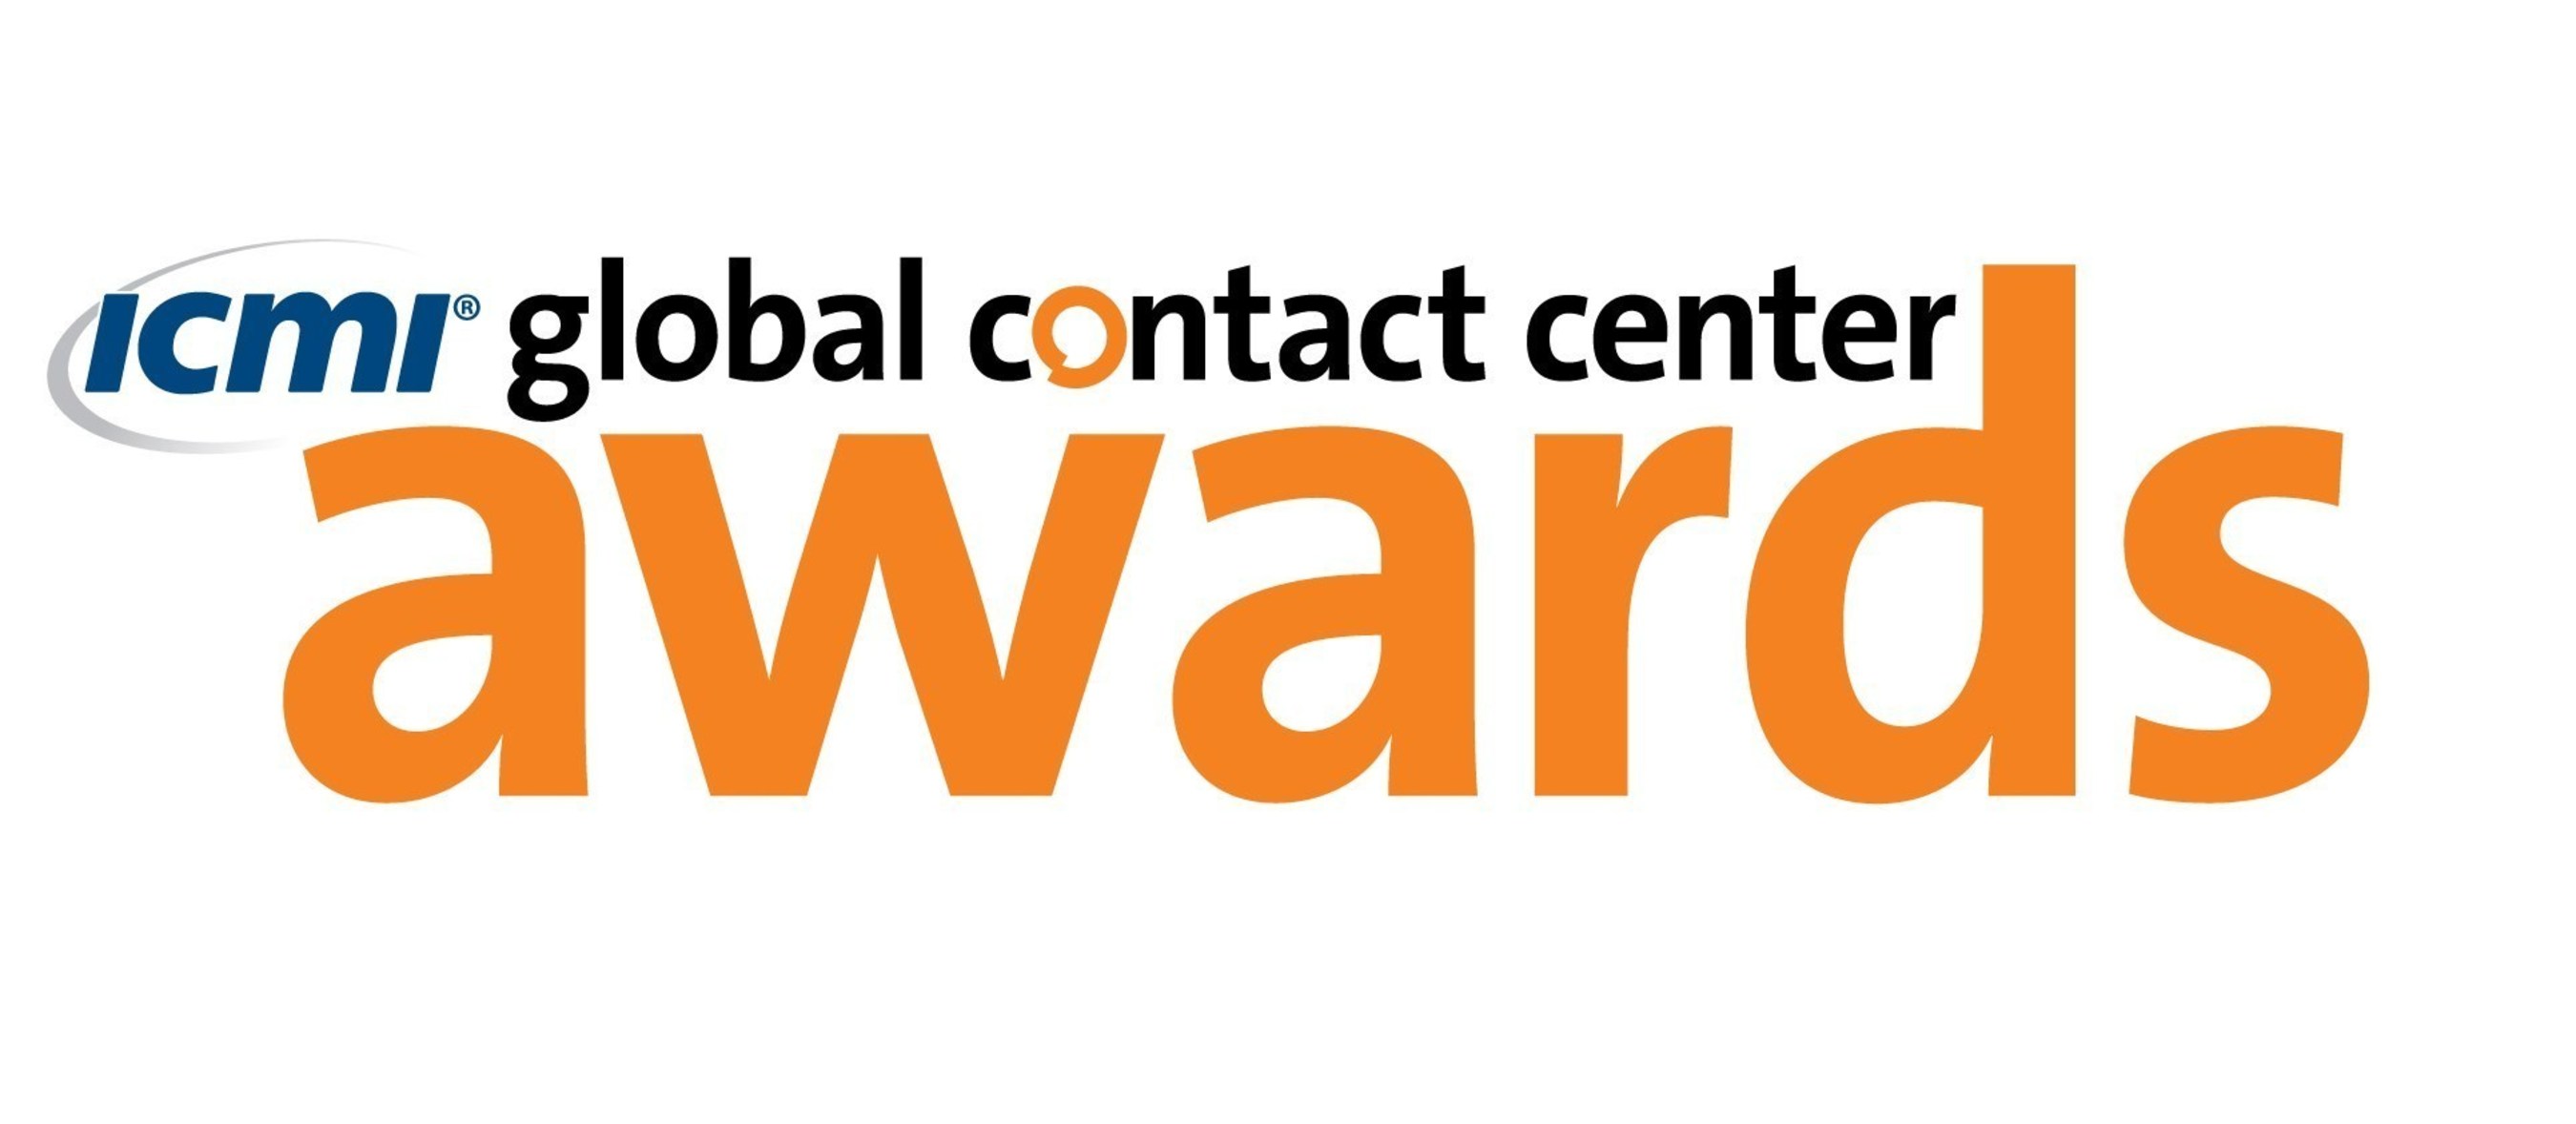 ICMI Now Accepting Submissions for 2017 Global Contact Center Awards